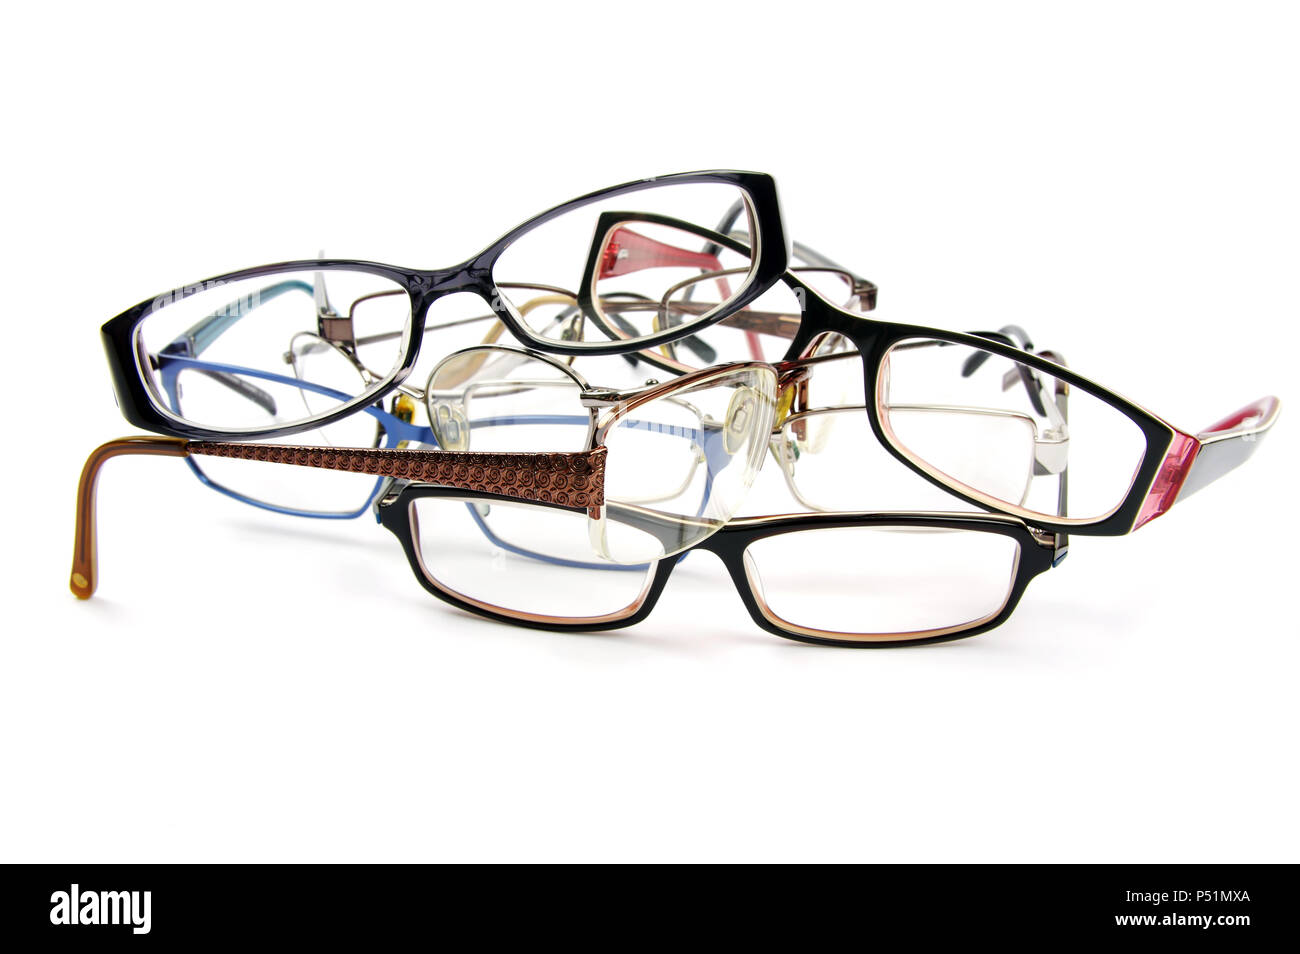 pile of old reading glasses on a white background close up view Stock Photo